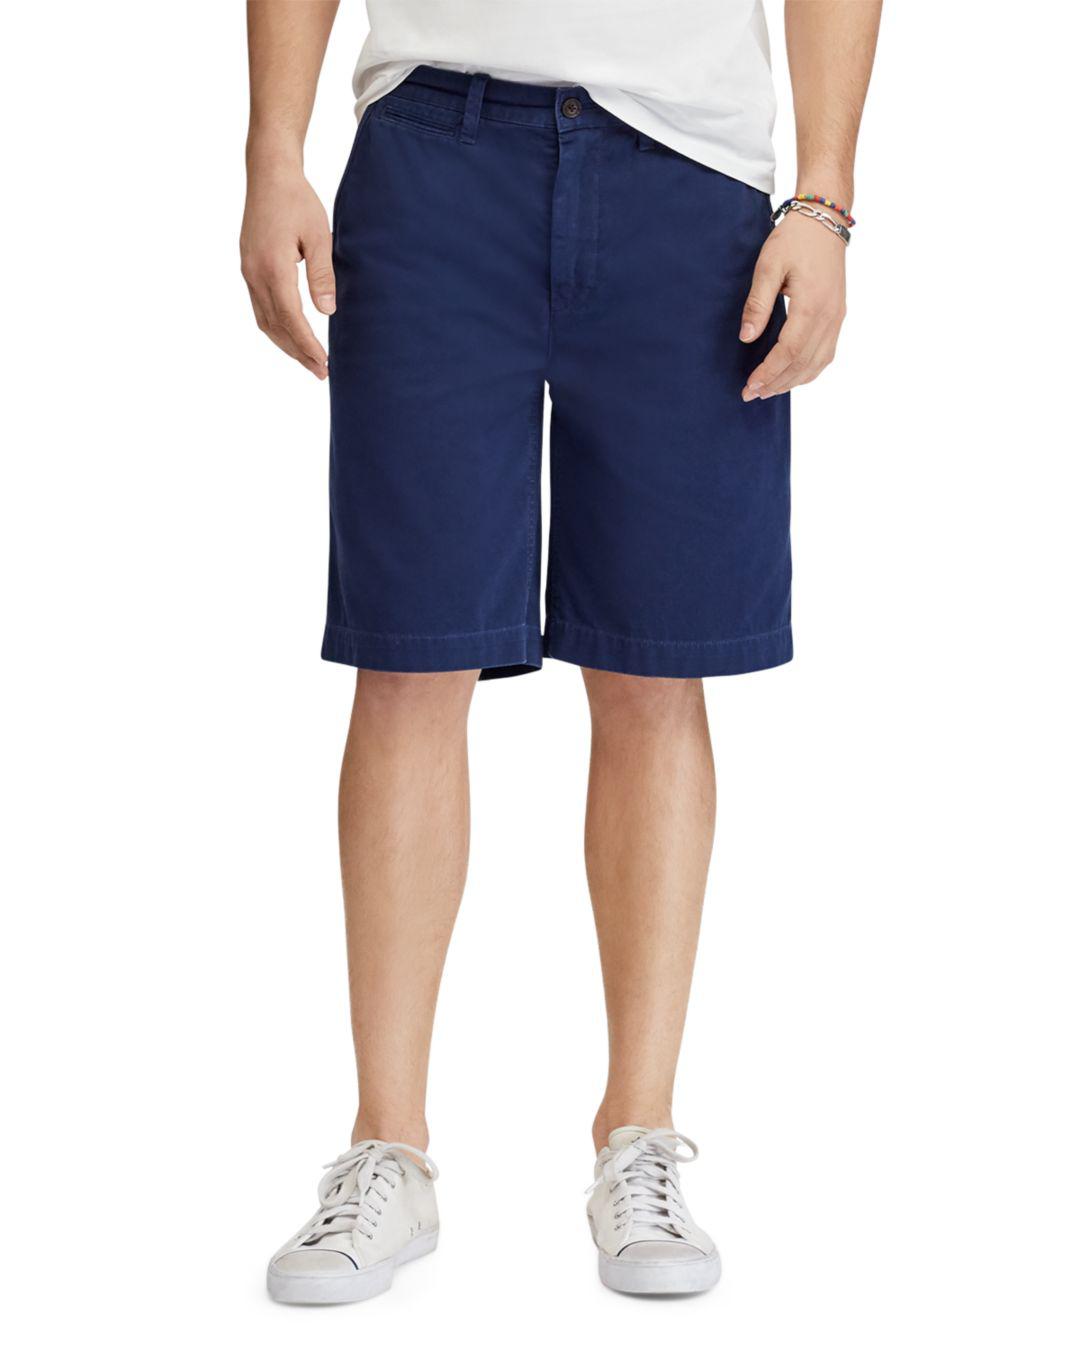 Polo Ralph Lauren Relaxed Fit Chino Shorts in Navy (Blue) for Men - Lyst